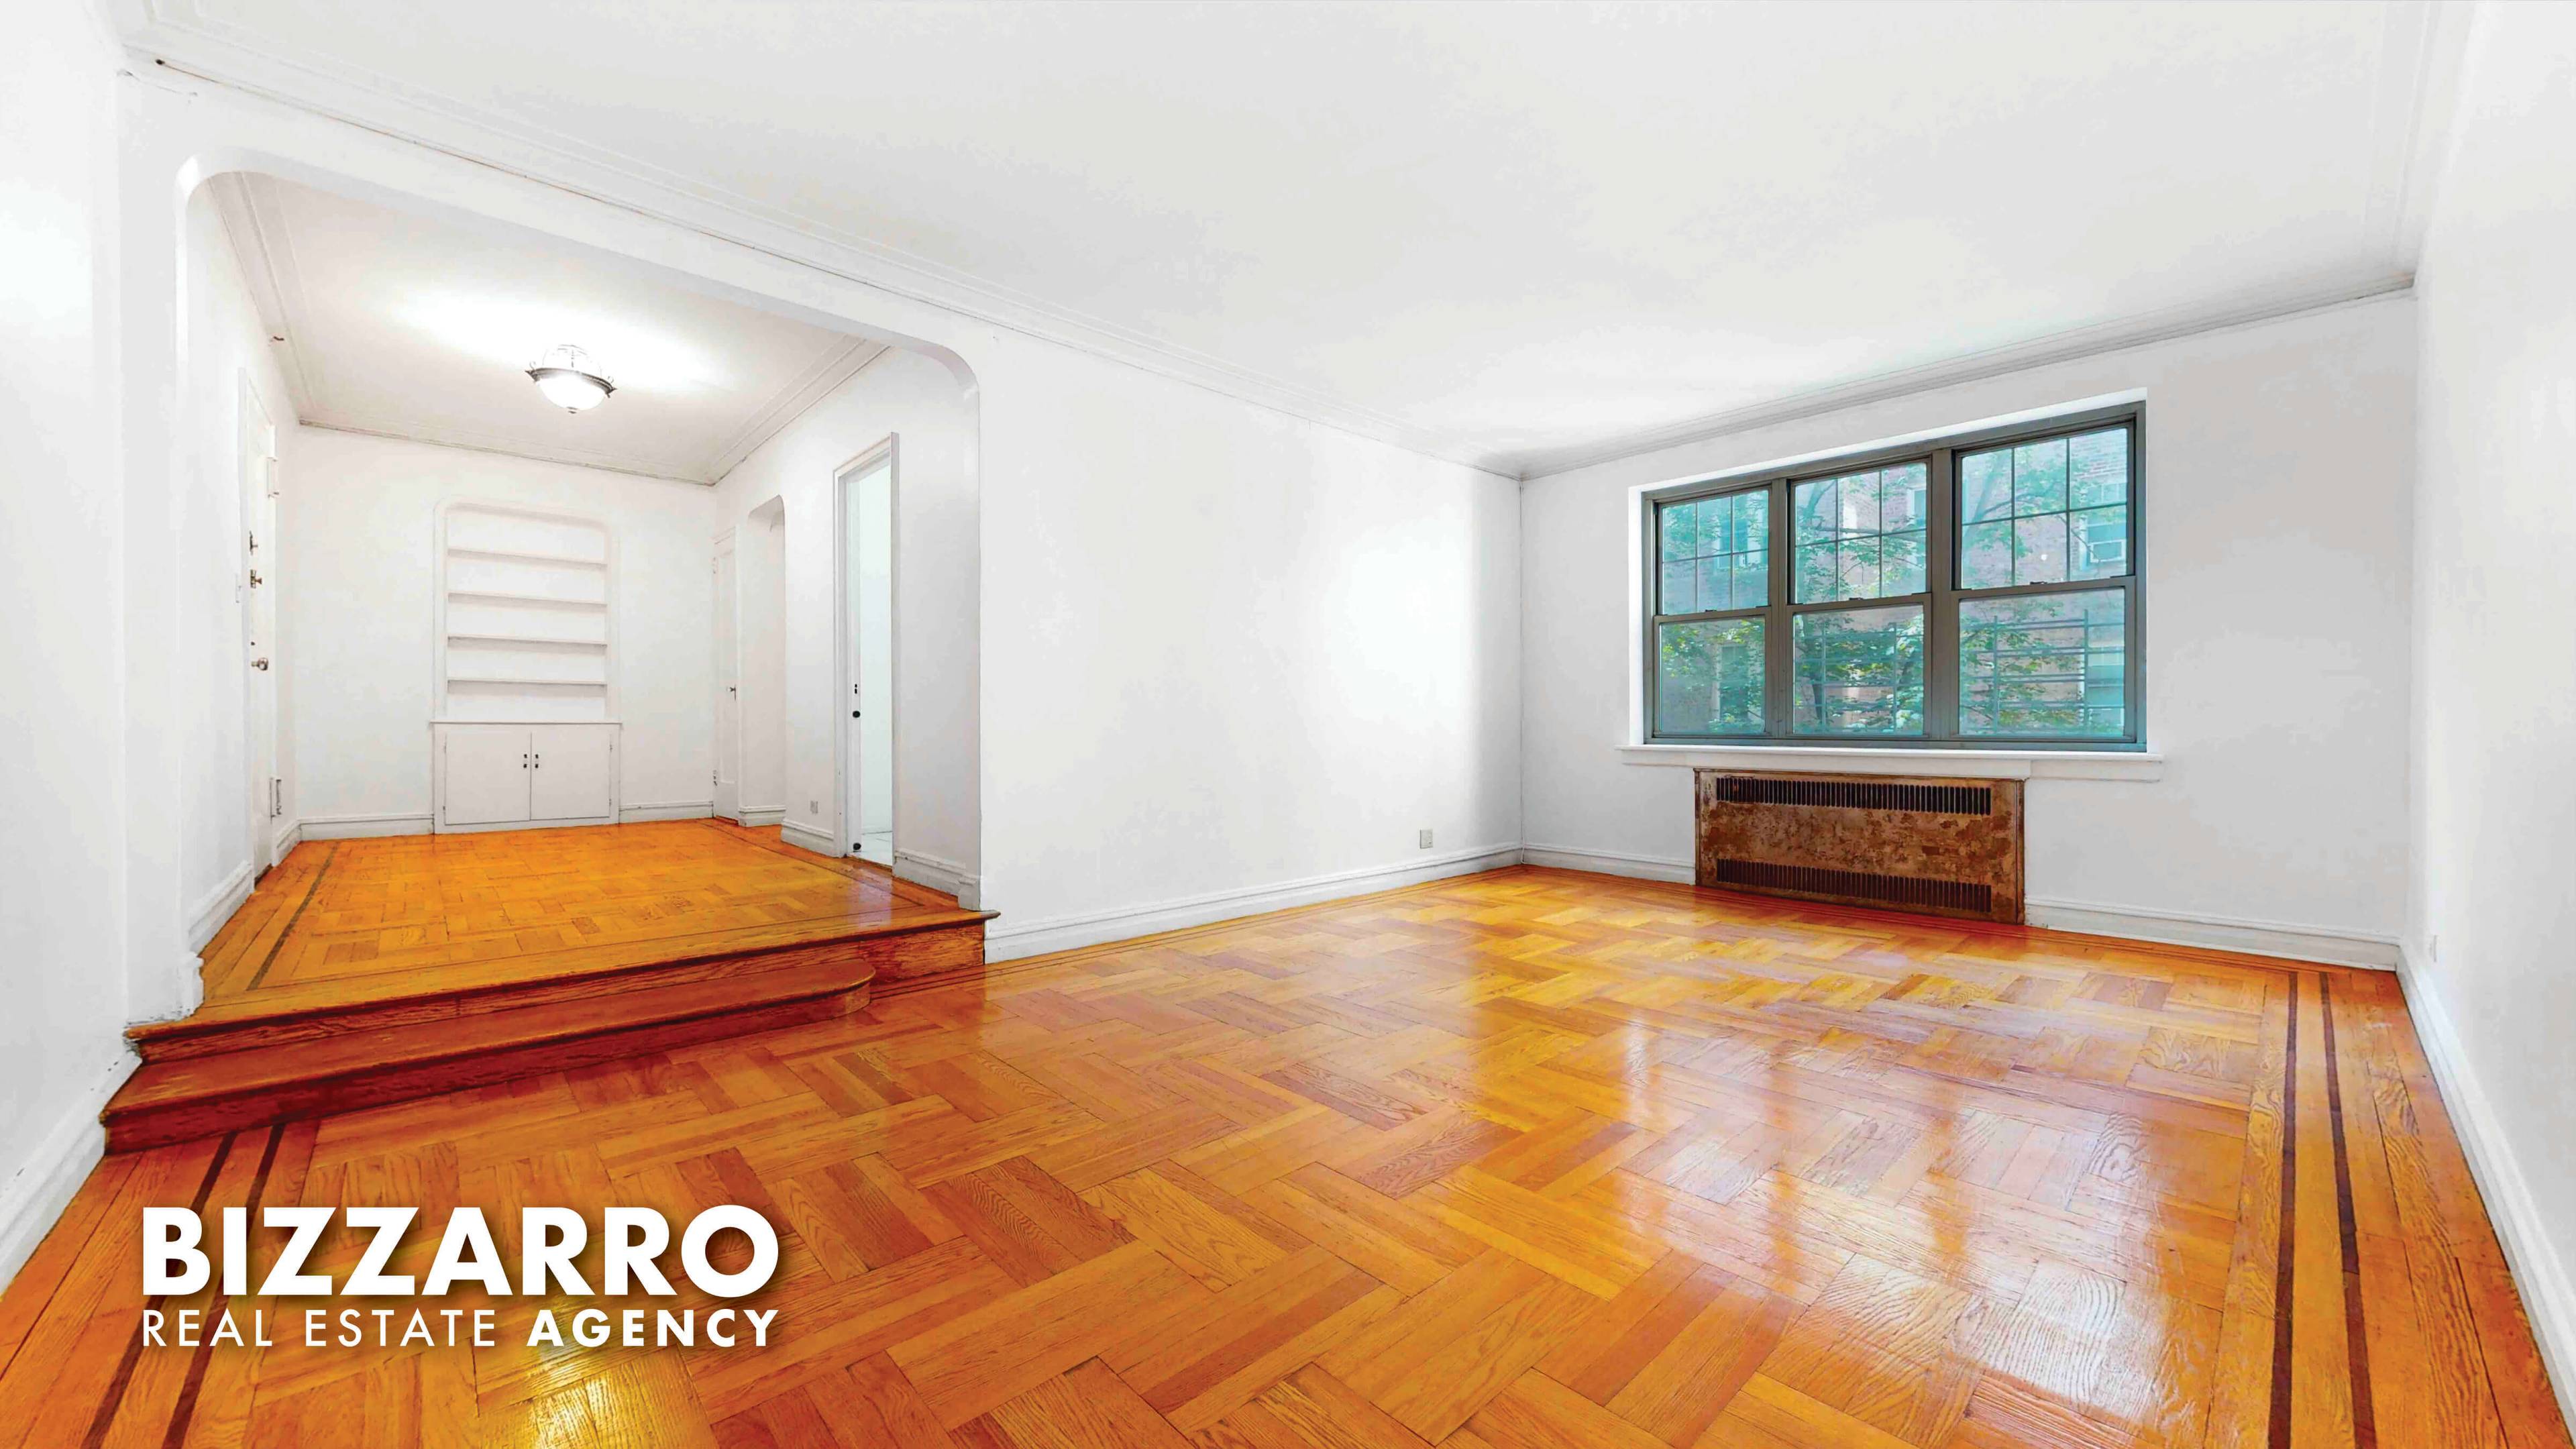 A SIMPLY MASSIVE 1BR ! ! Discover simplistic charm at 720 Fort Washington, located just outside the A 190st station in the serene neighborhood of Hudson Heights.